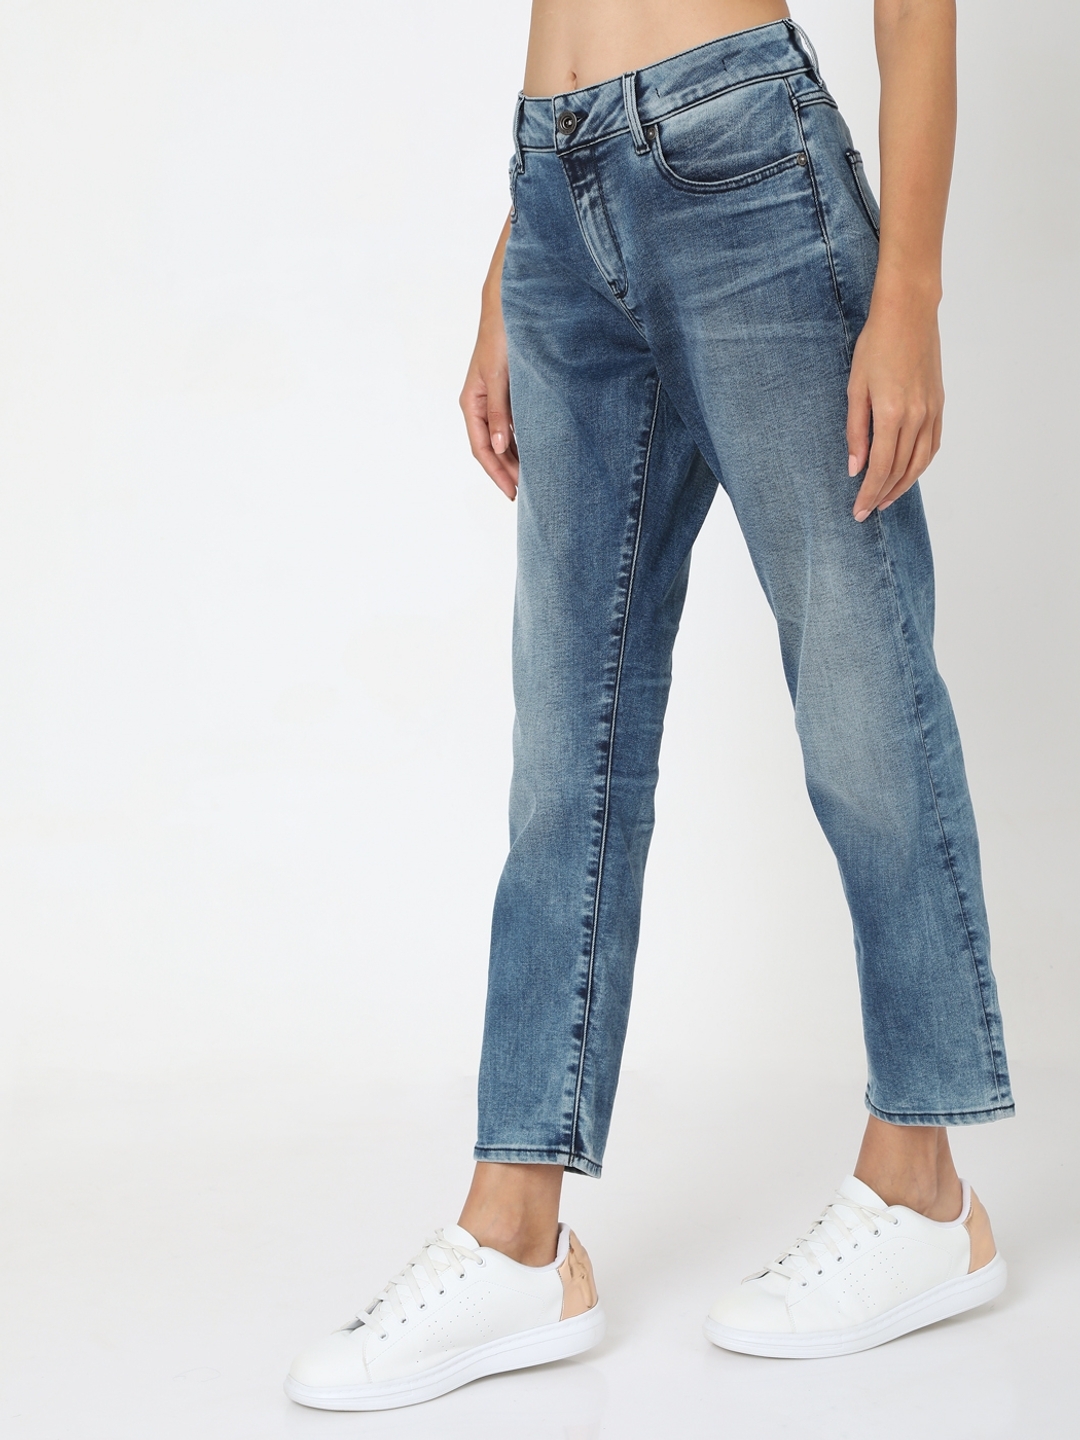 Sizing Guide for Women's Jeans - Denim Fit Guide - Trenery-nttc.com.vn